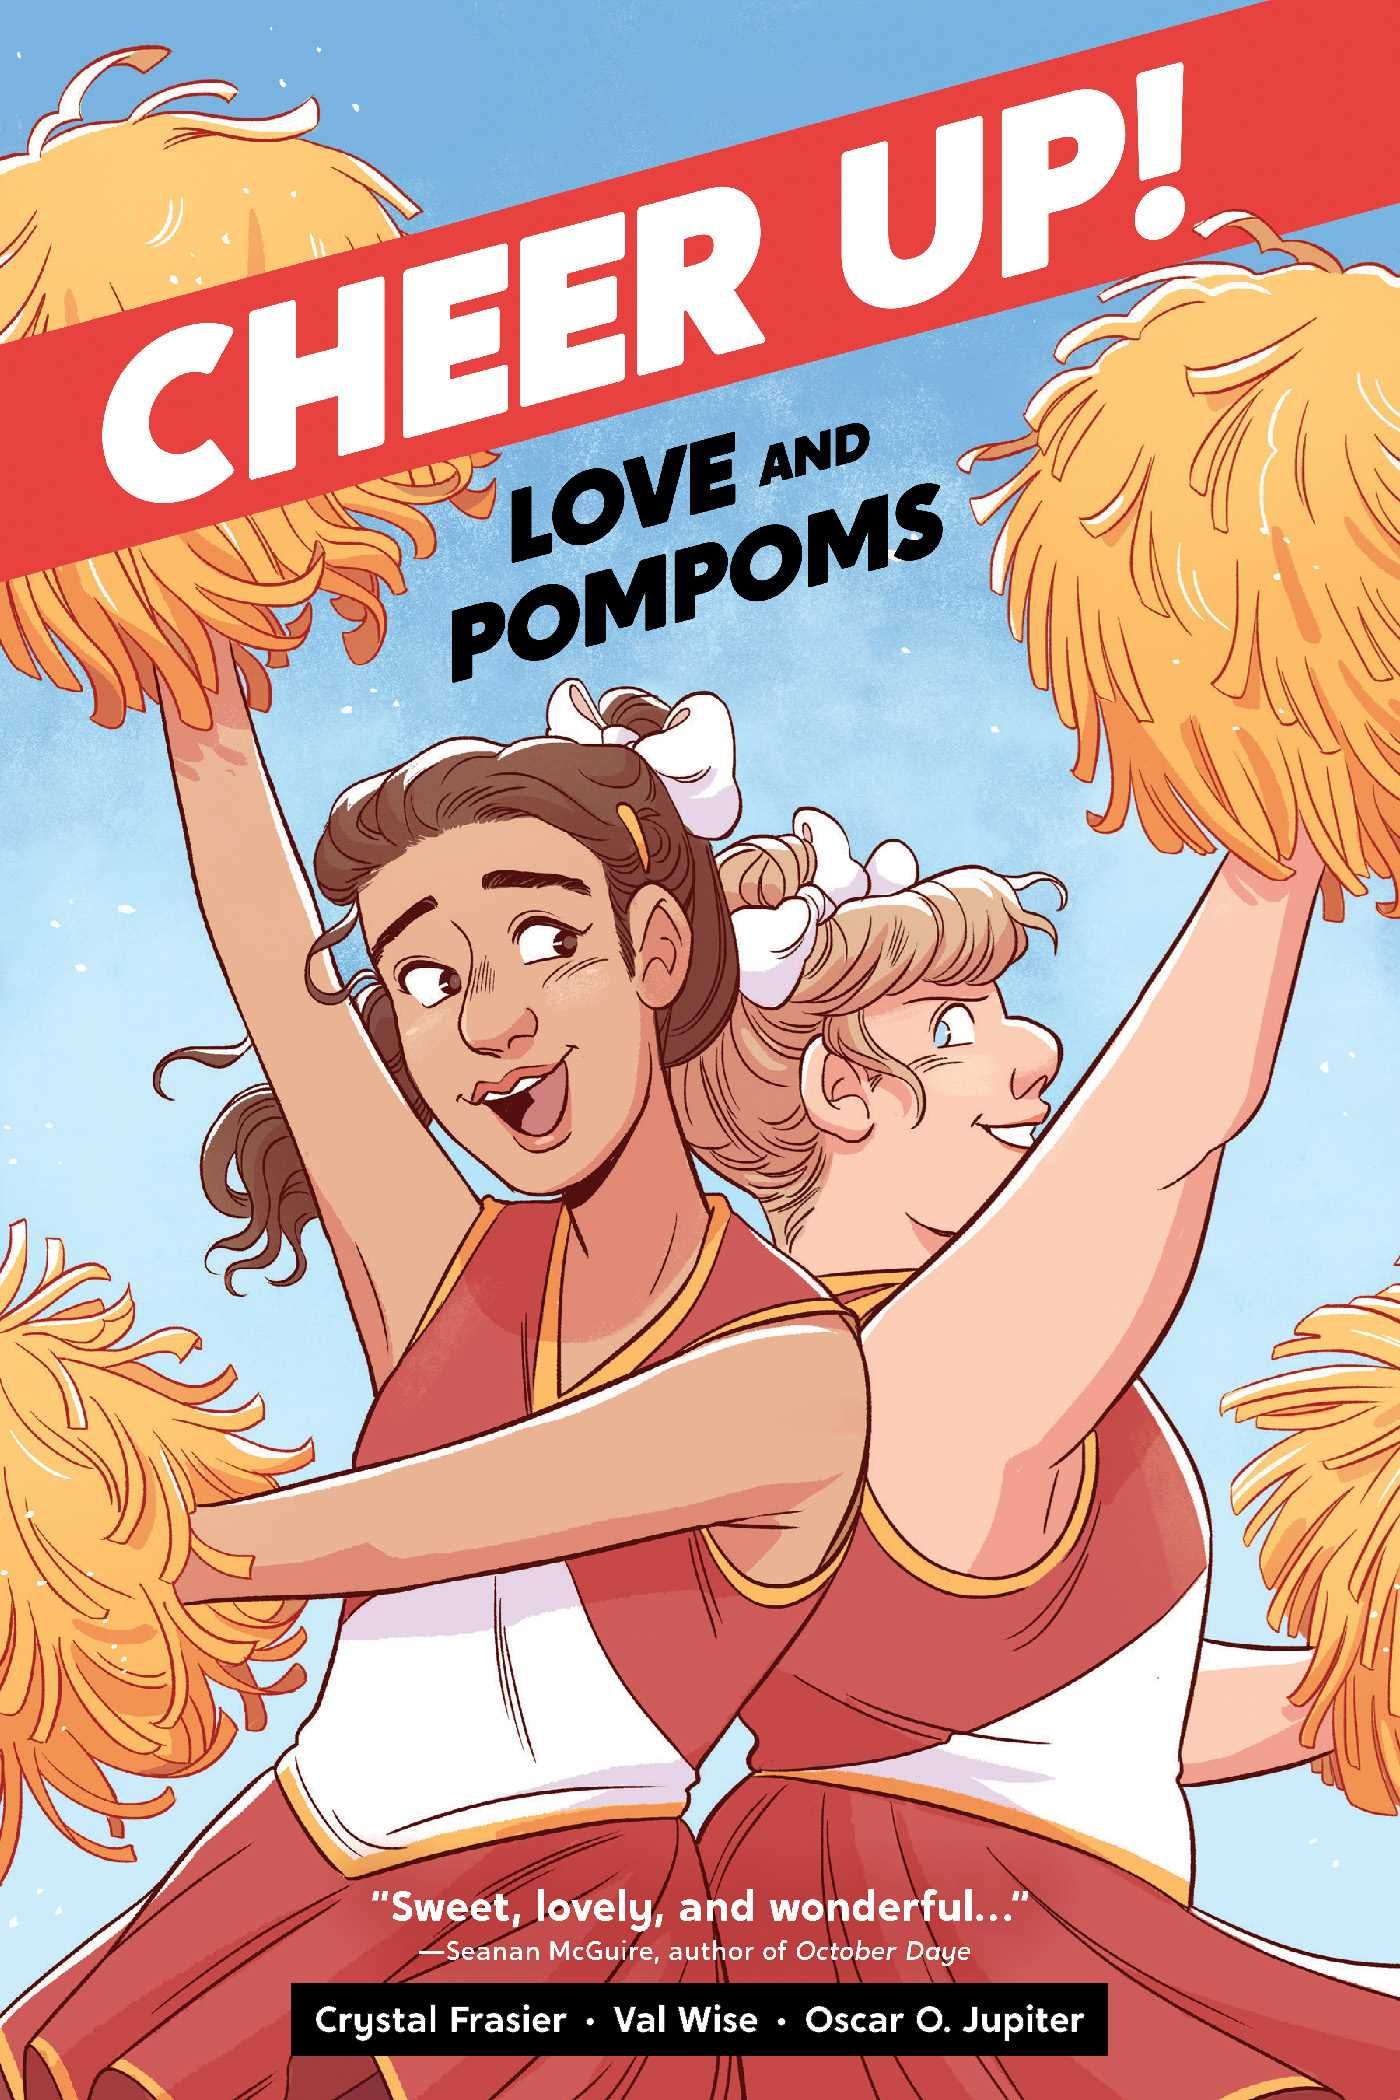 Cheer Up by Crystal Frasier and Val Wise book cover